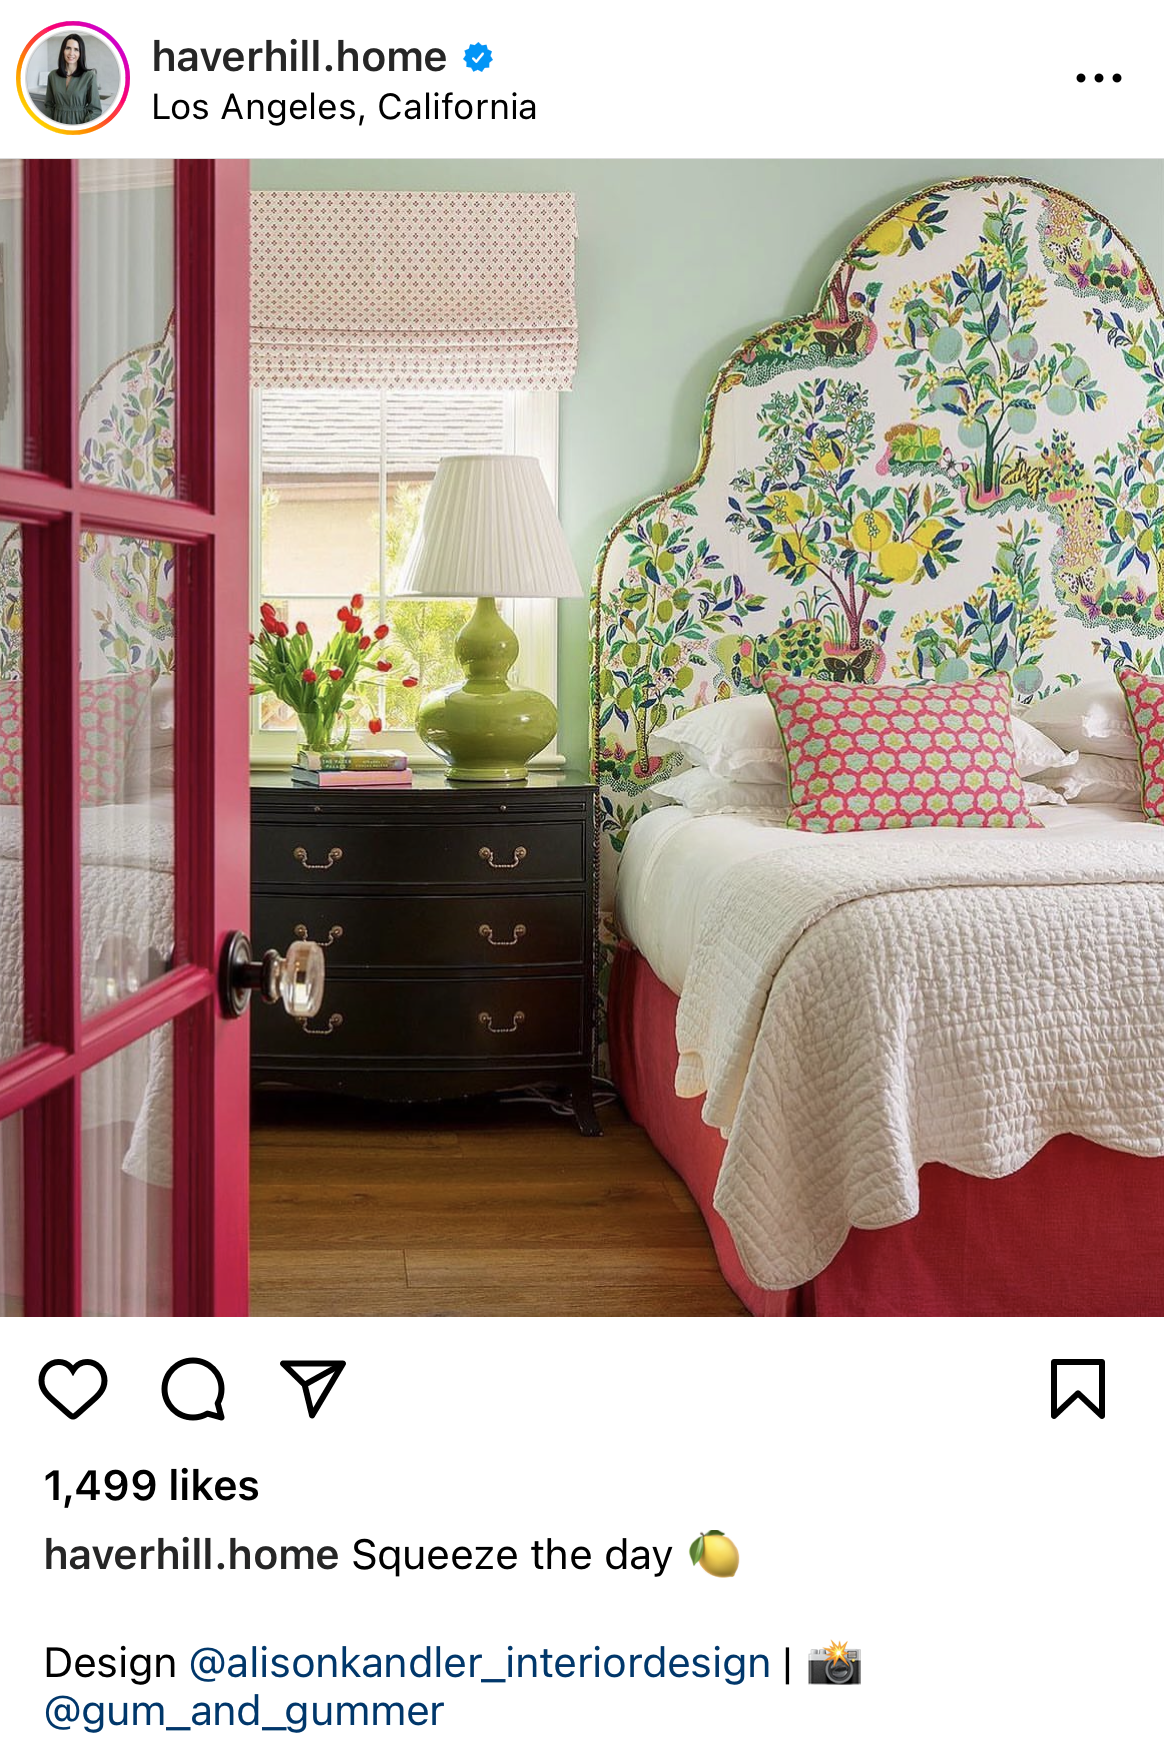 Instagram screenshot of colourful grandmillennial style bedroom with a red doo by blogger @haverhillhome